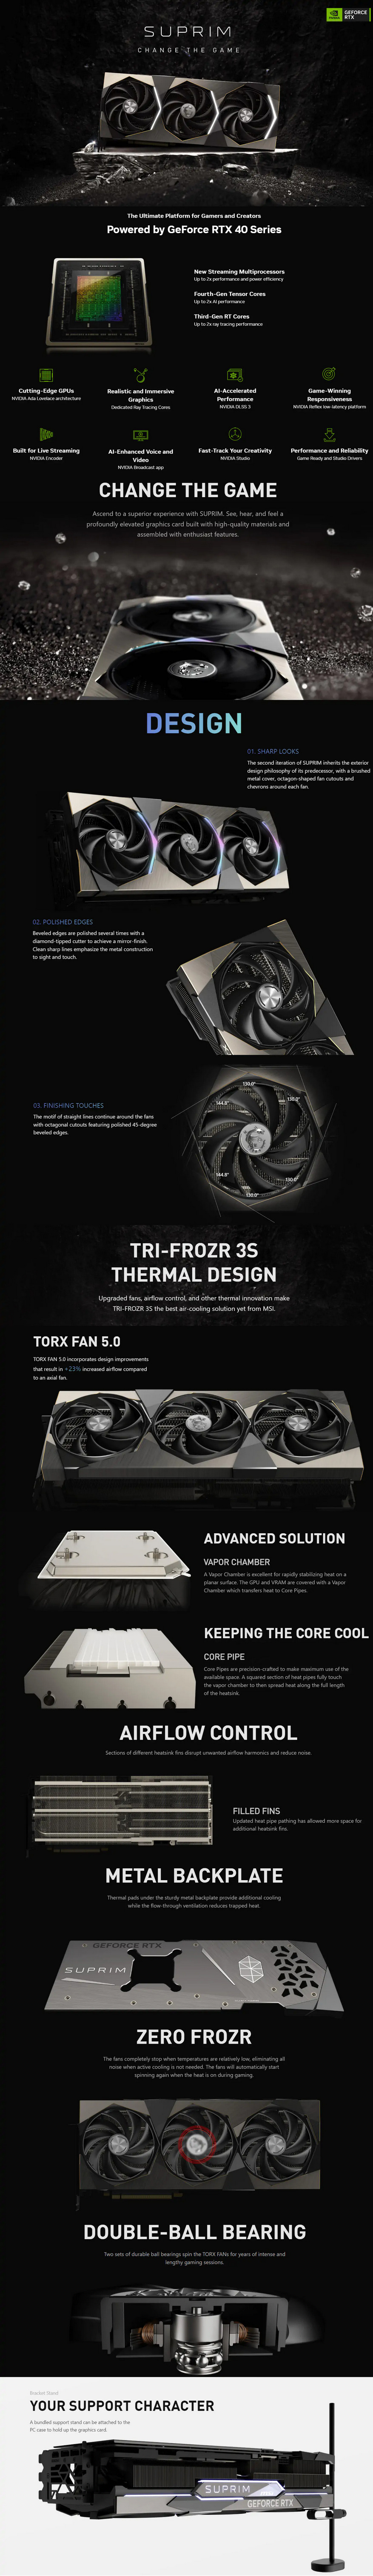 A large marketing image providing additional information about the product MSI GeForce RTX 4080 SUPER Suprim X 16GB GDDR6X - Additional alt info not provided